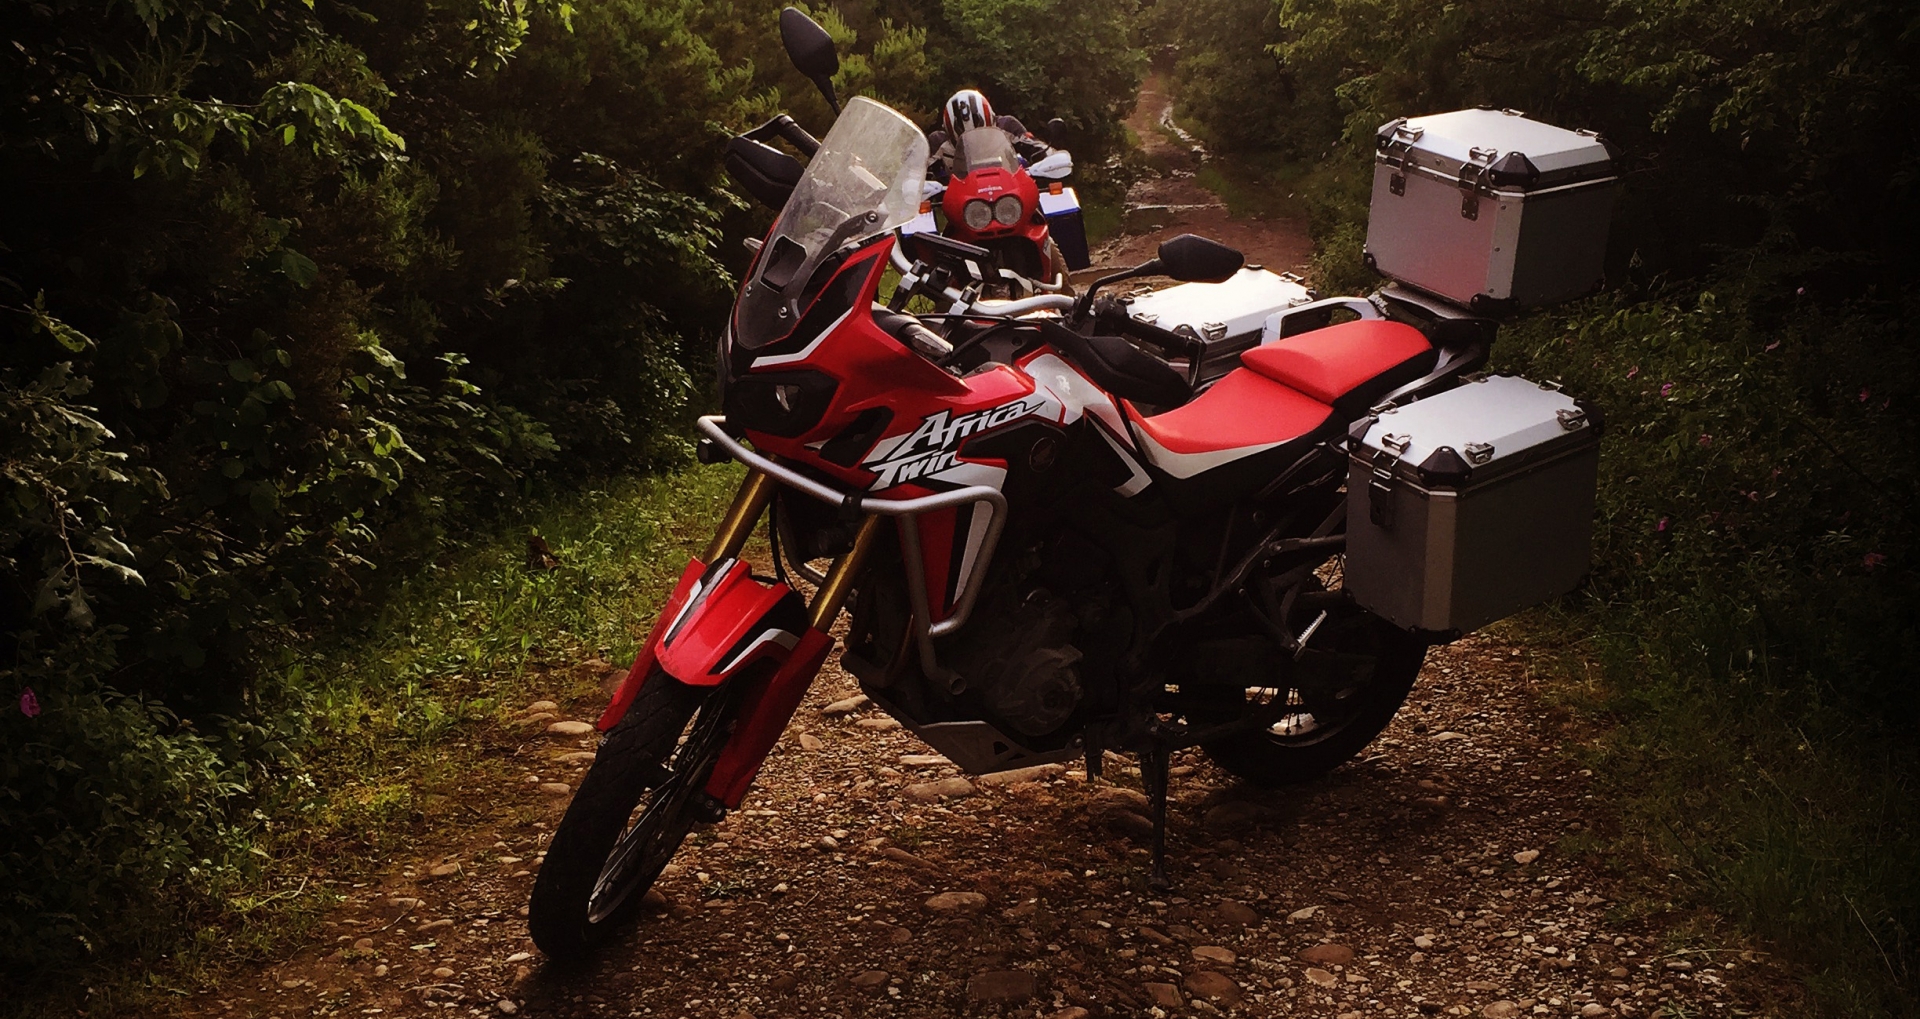 Africa Twin CRF1000L